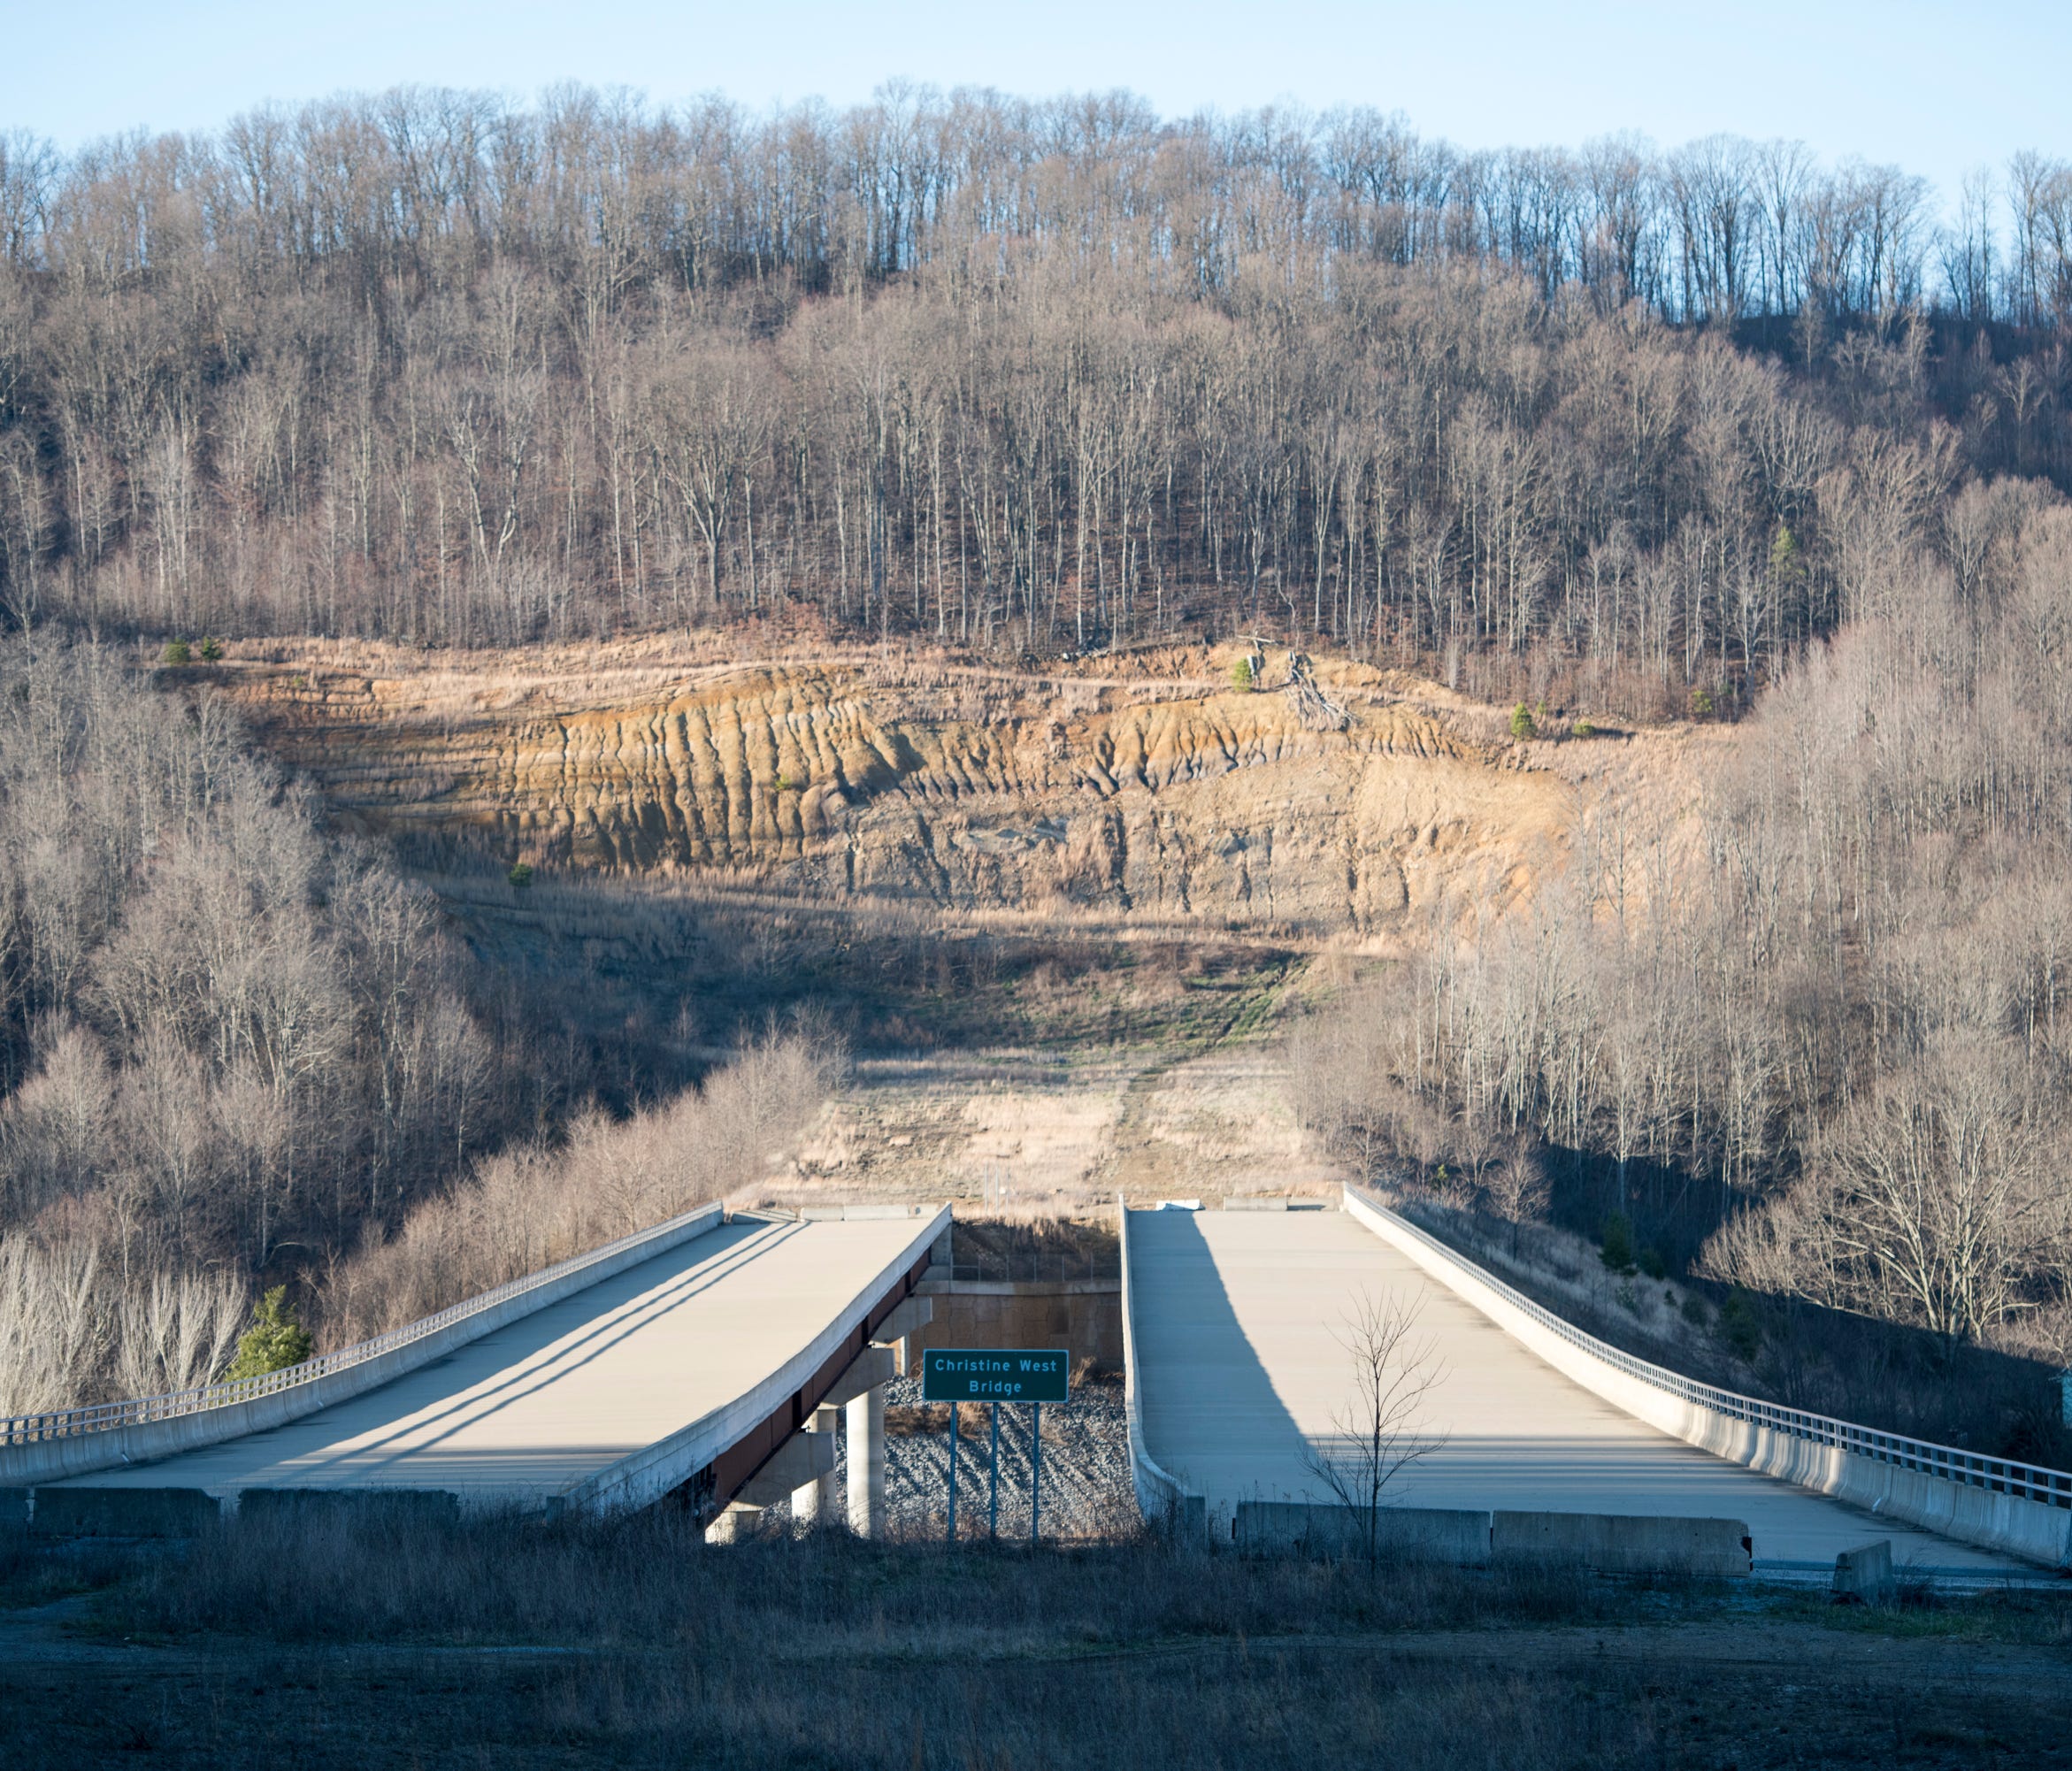 The Christine West bridge was built in 2009, but the connecting sections of the King Coal Highway project have yet to be completed and are on hold until funding can be found.